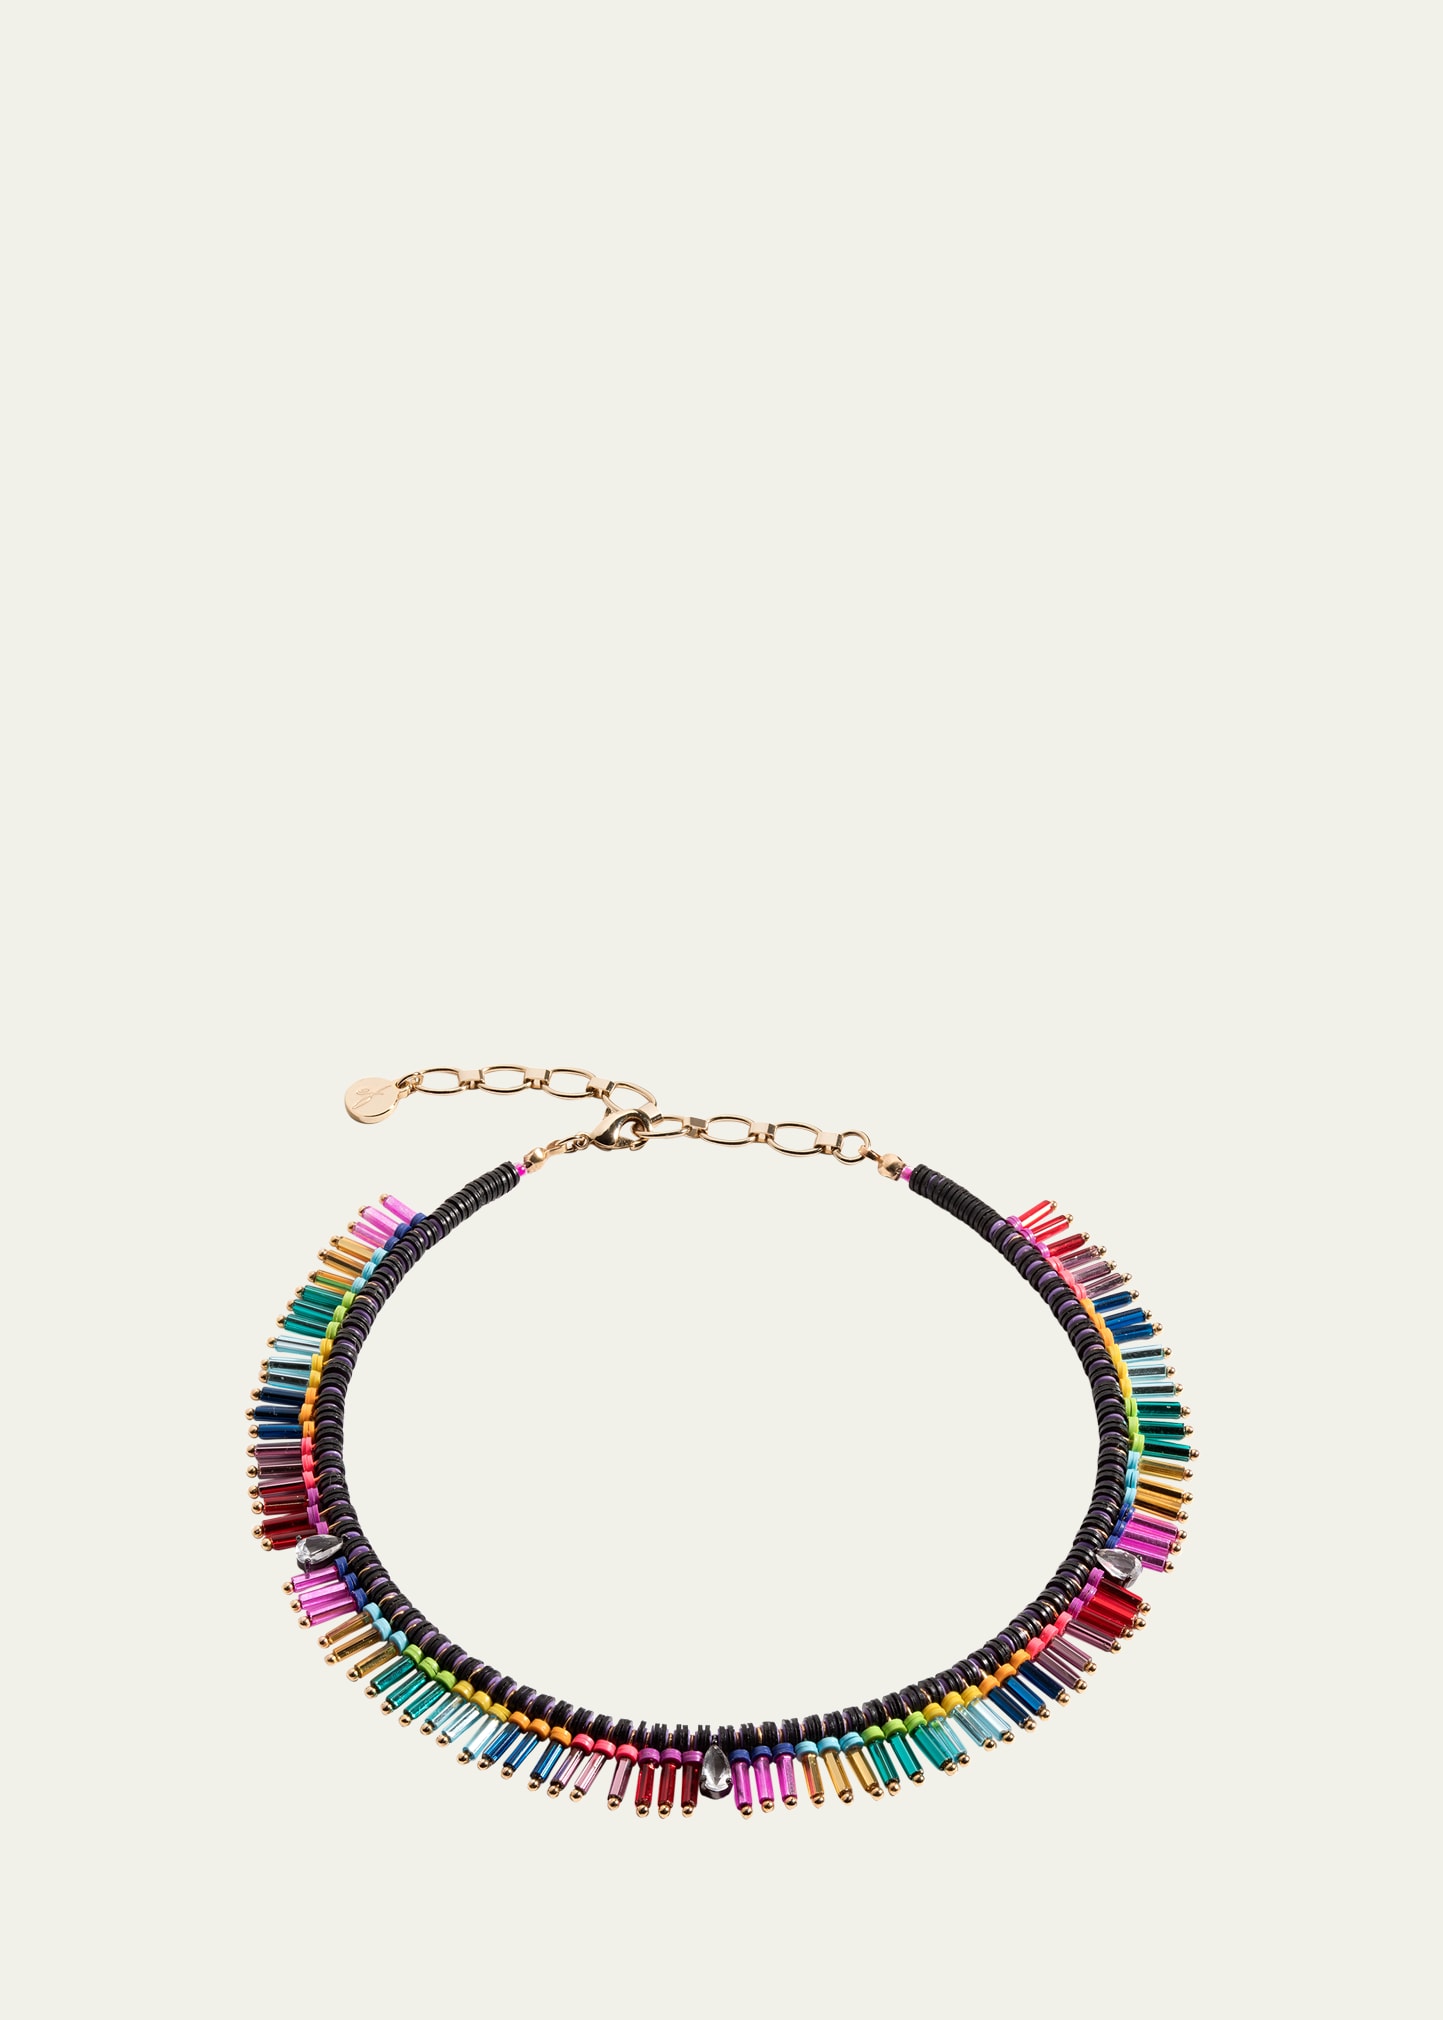 On The Fringe Necklace in Lite Brite